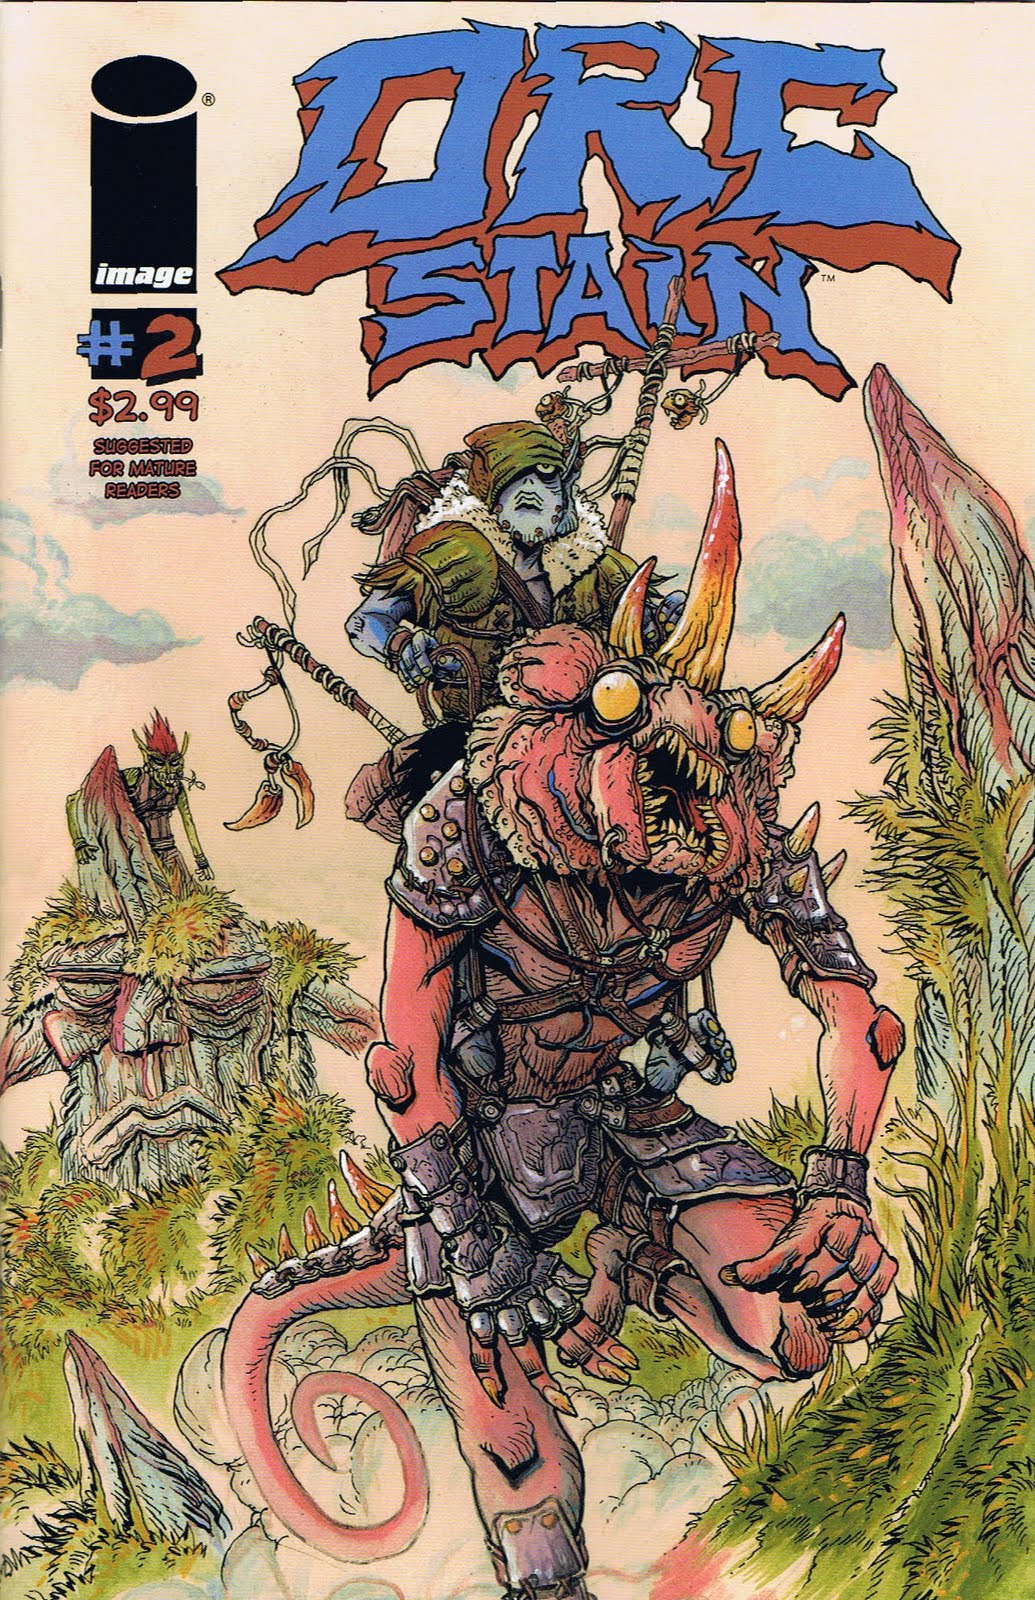 Orc+Stain+2+cover.jpg